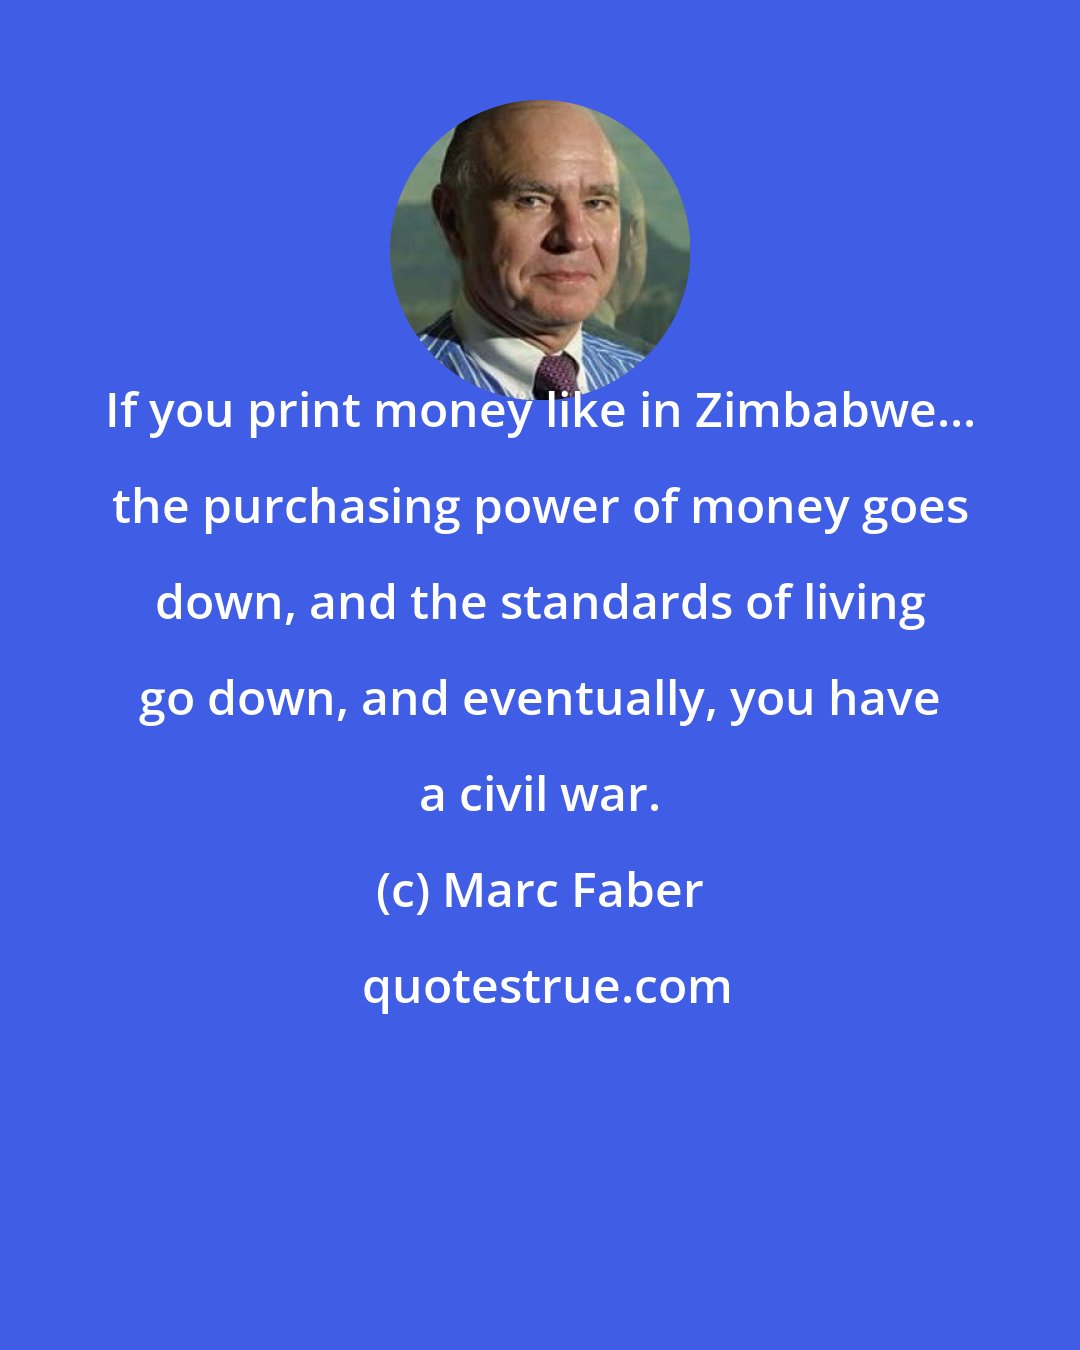 Marc Faber: If you print money like in Zimbabwe... the purchasing power of money goes down, and the standards of living go down, and eventually, you have a civil war.